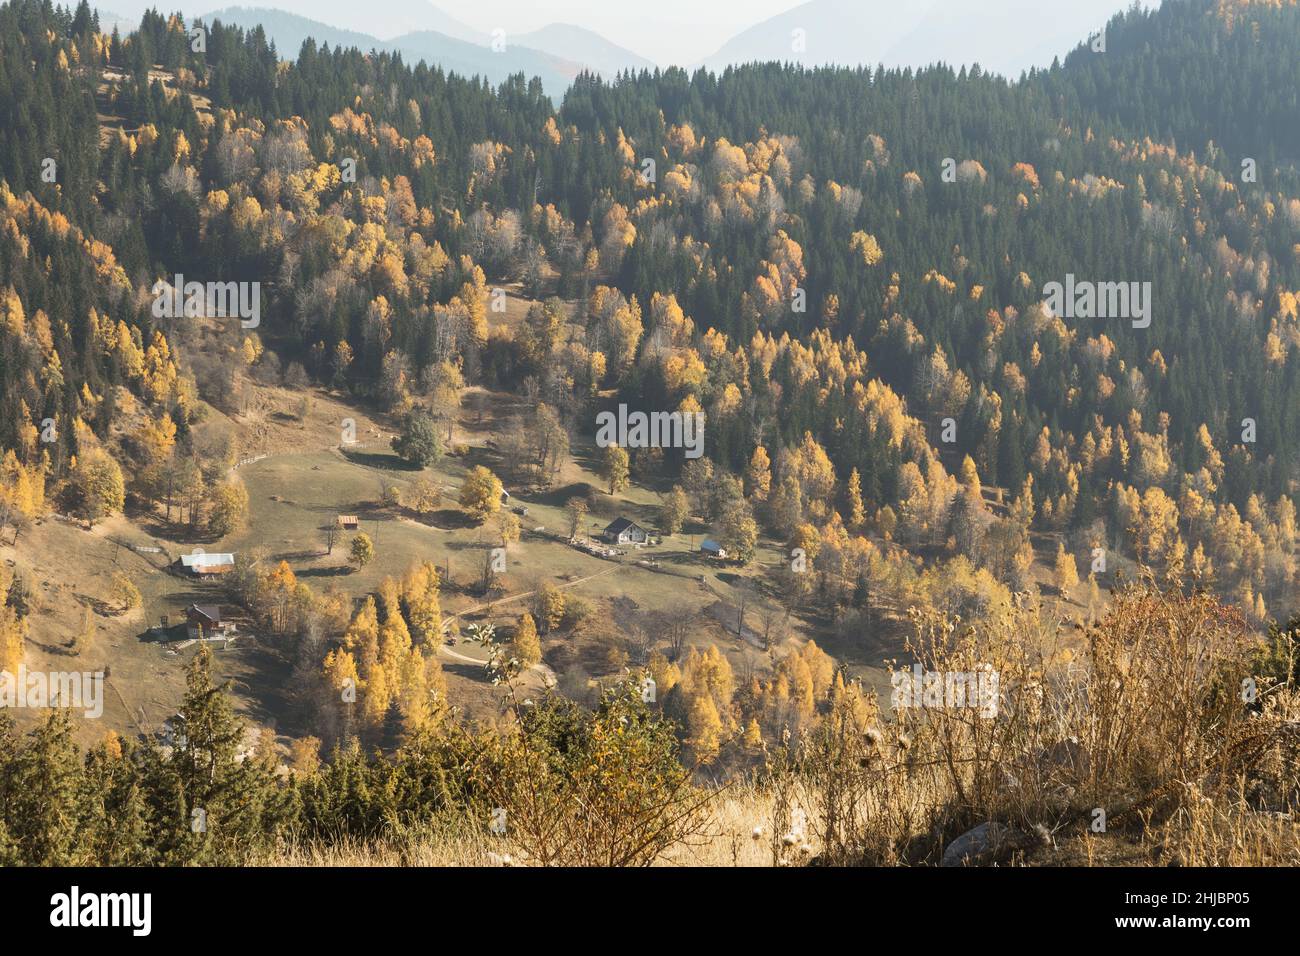 Mountain of Boge, Rogove surrounded by colorful forest in the autumn season Stock Photo